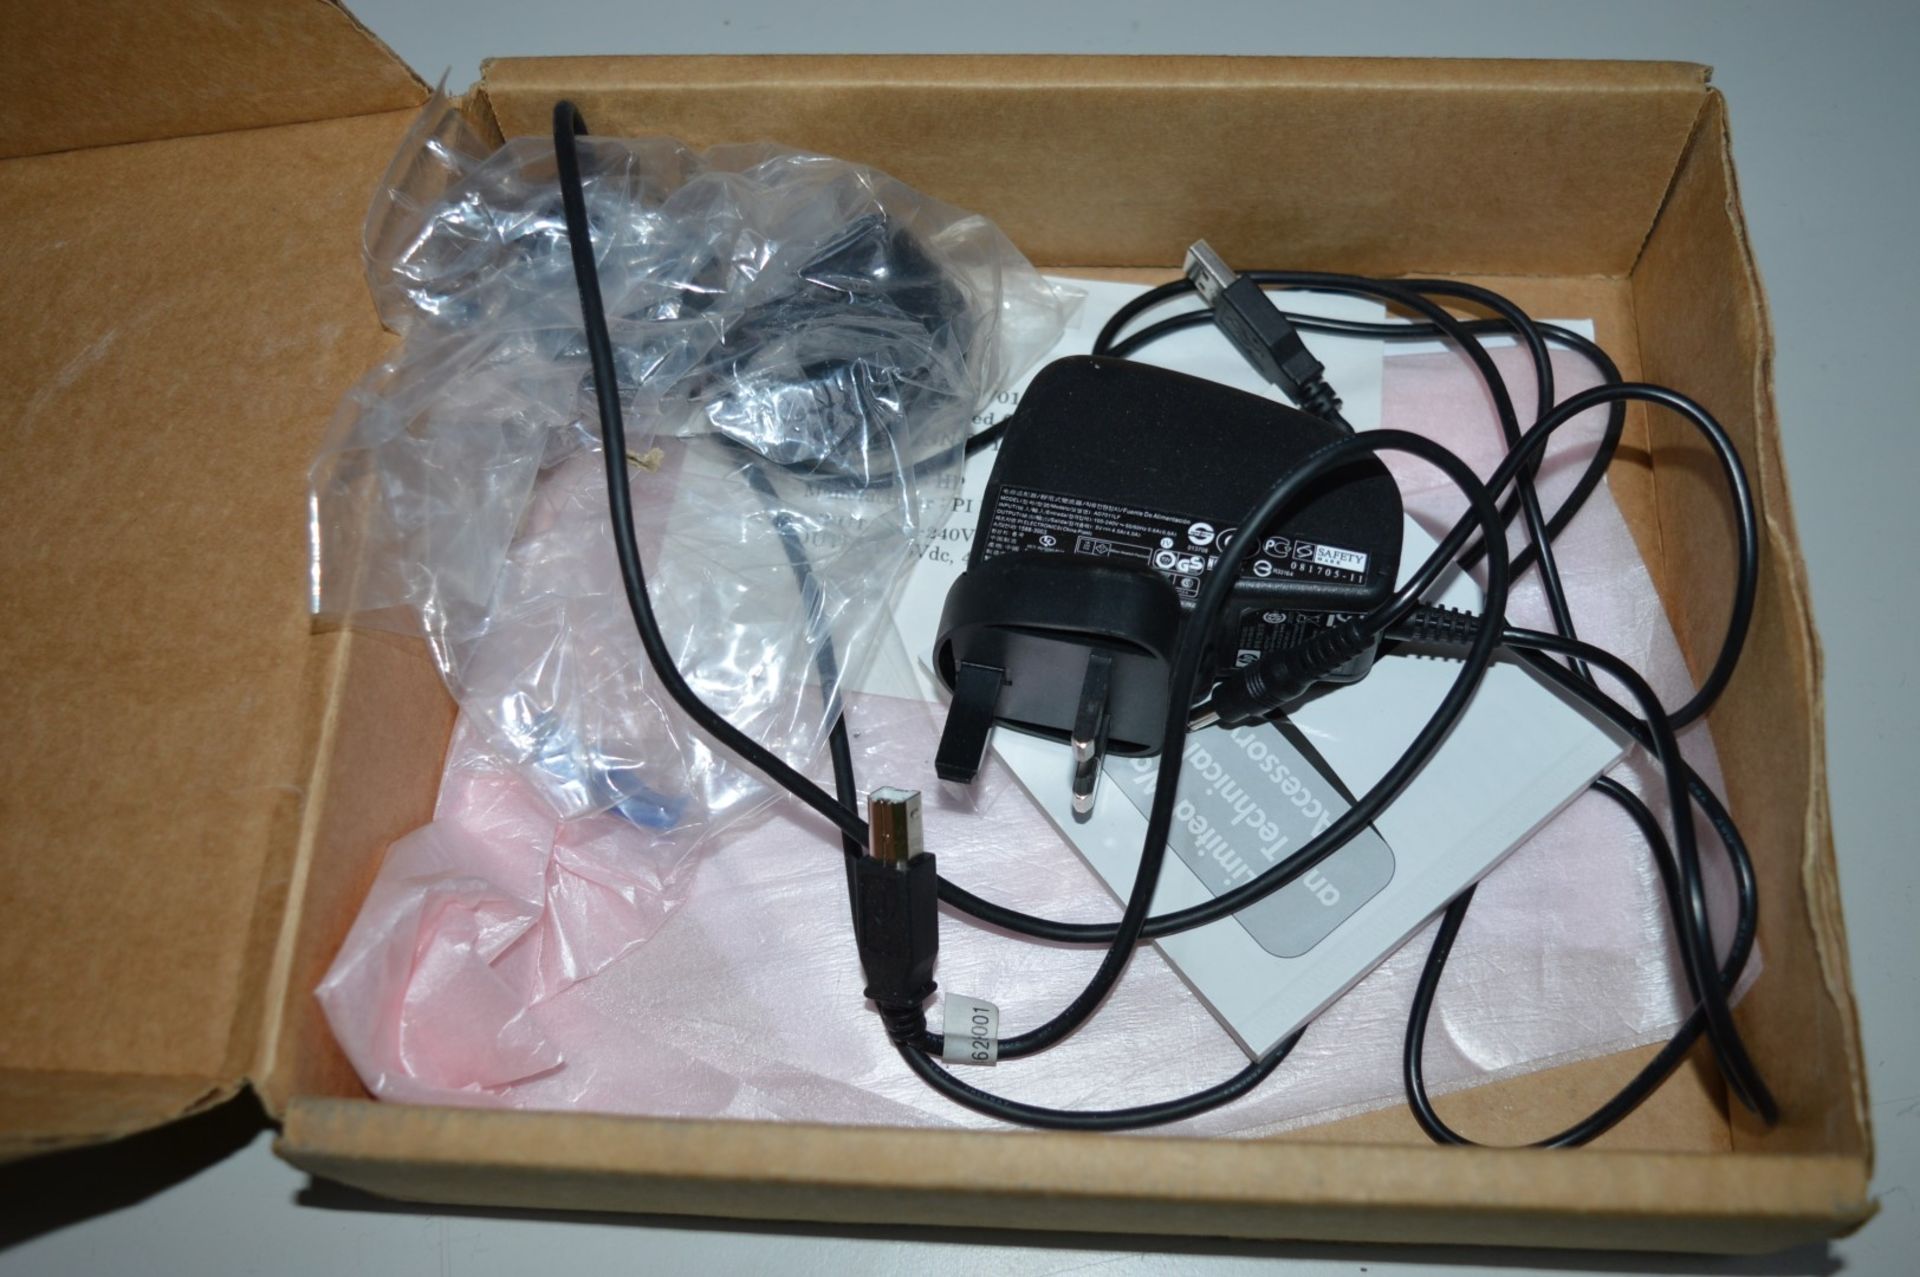 1 x HP USB Docking Station Port Replicator - Model HSTNN-S01X - With Manual and Power Adaptor - - Image 2 of 4